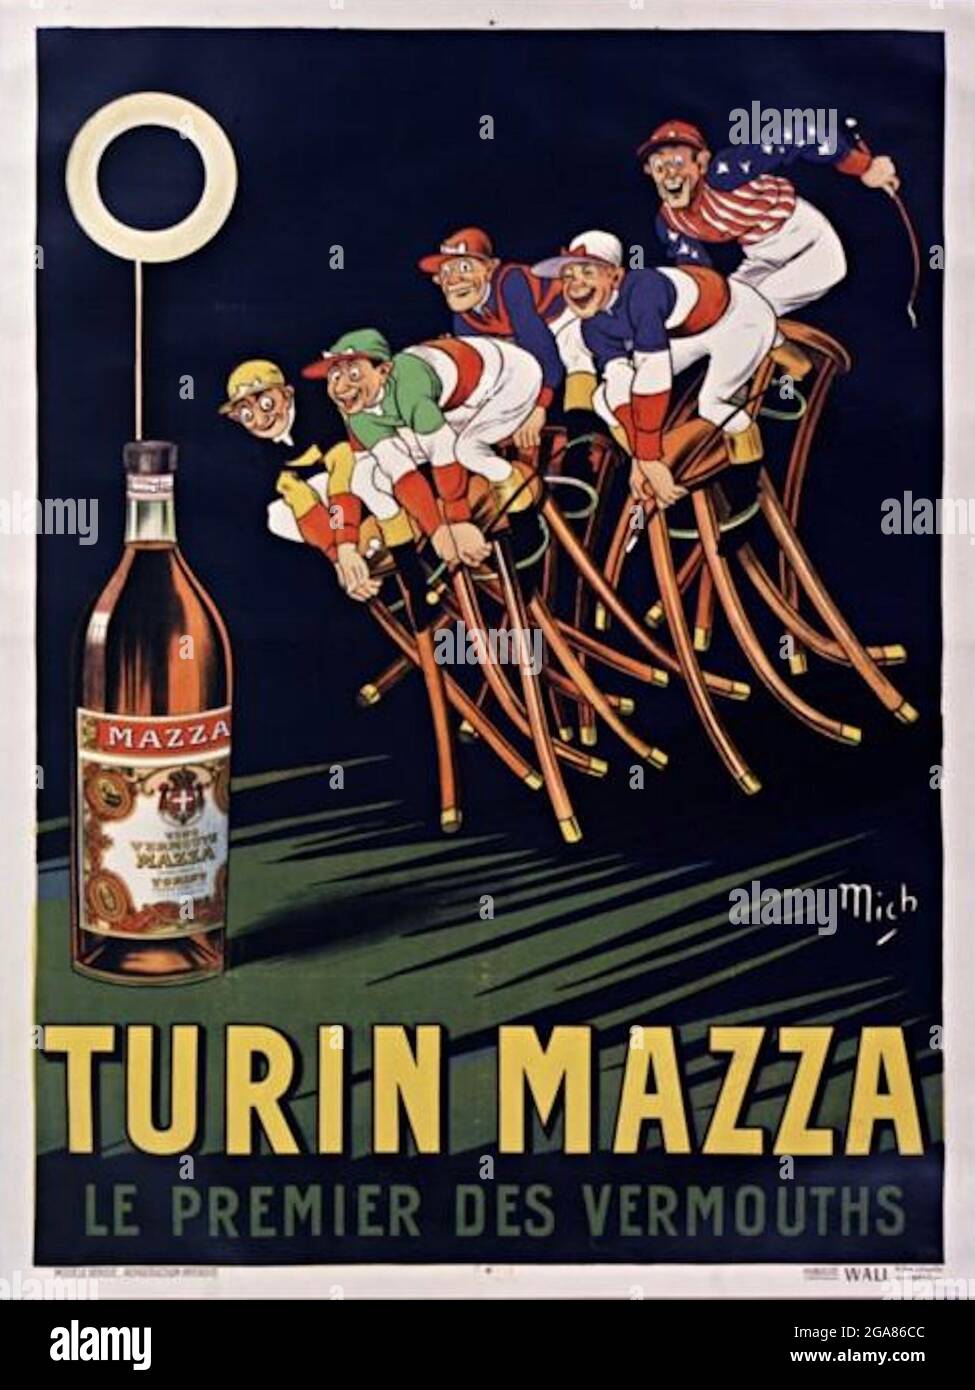 Advertising poster for Turin Mazza Vermouth, by Mich otherwise known as  Jean-Marie-Michel Liébaux. Stock Photo